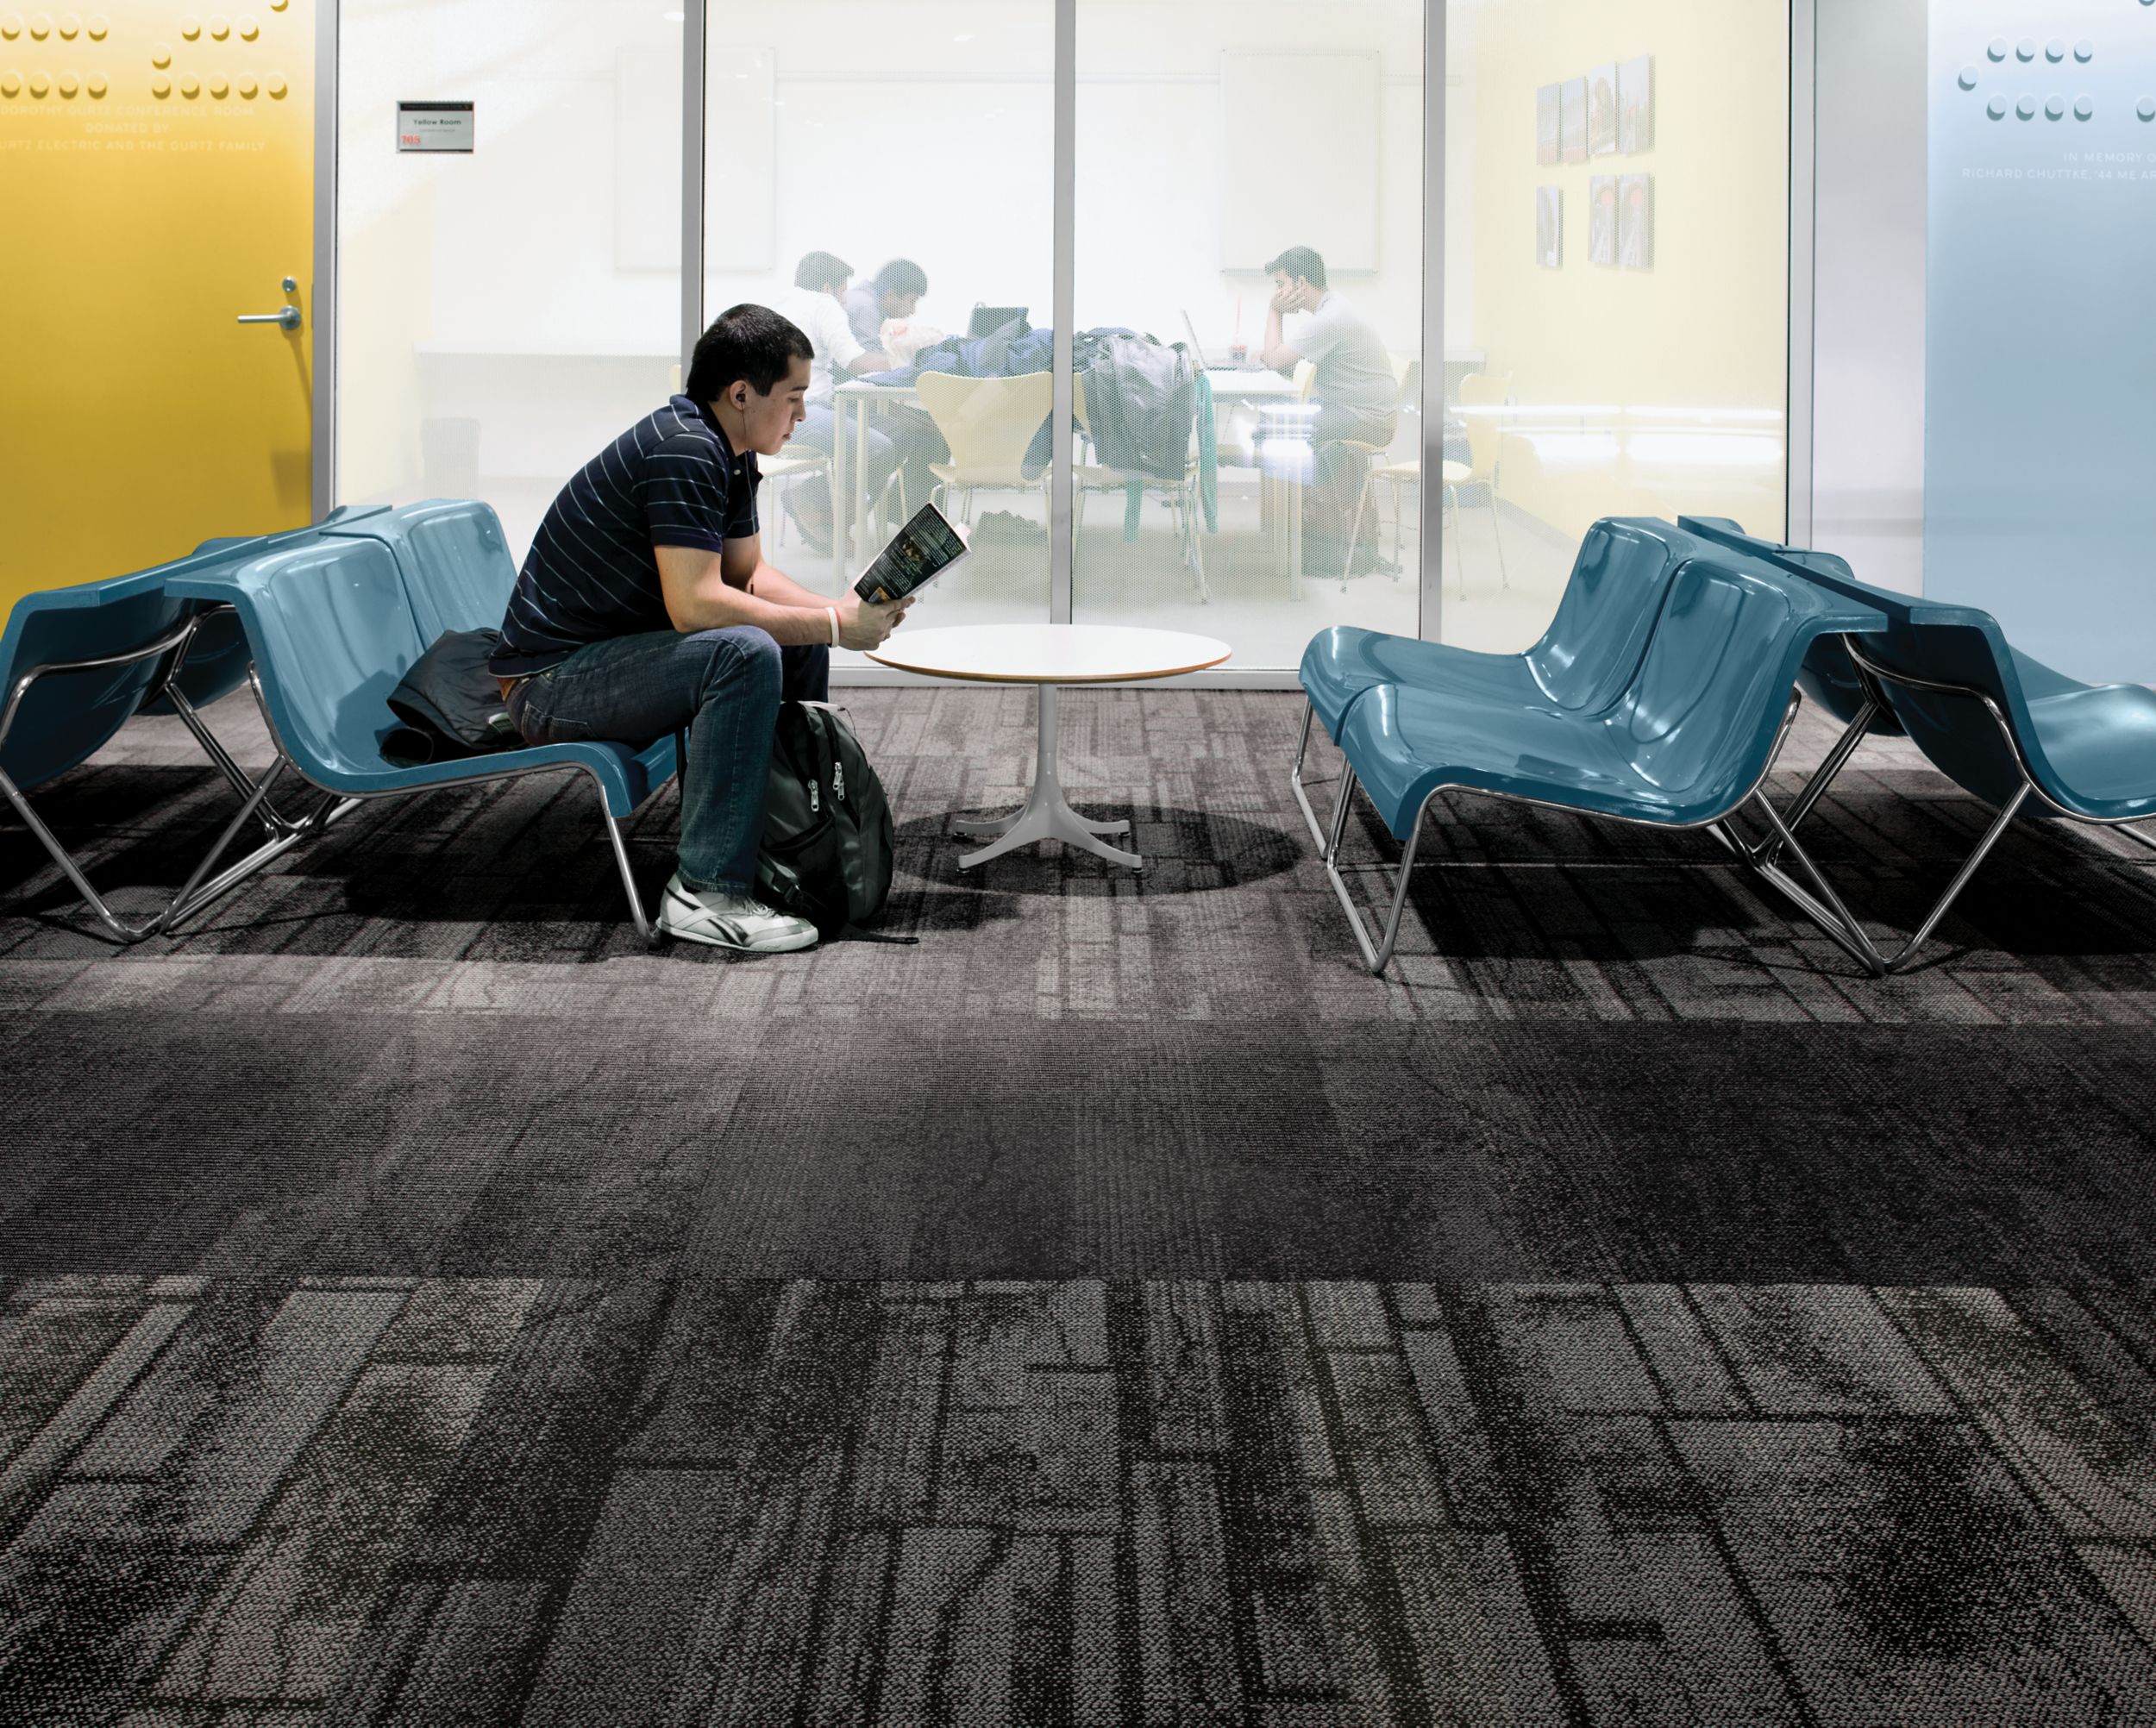 Interface Neighborhood Blocks and Neighborhood Smooth plank carpet tile in public education space with man reading a book on blue chair numéro d’image 6